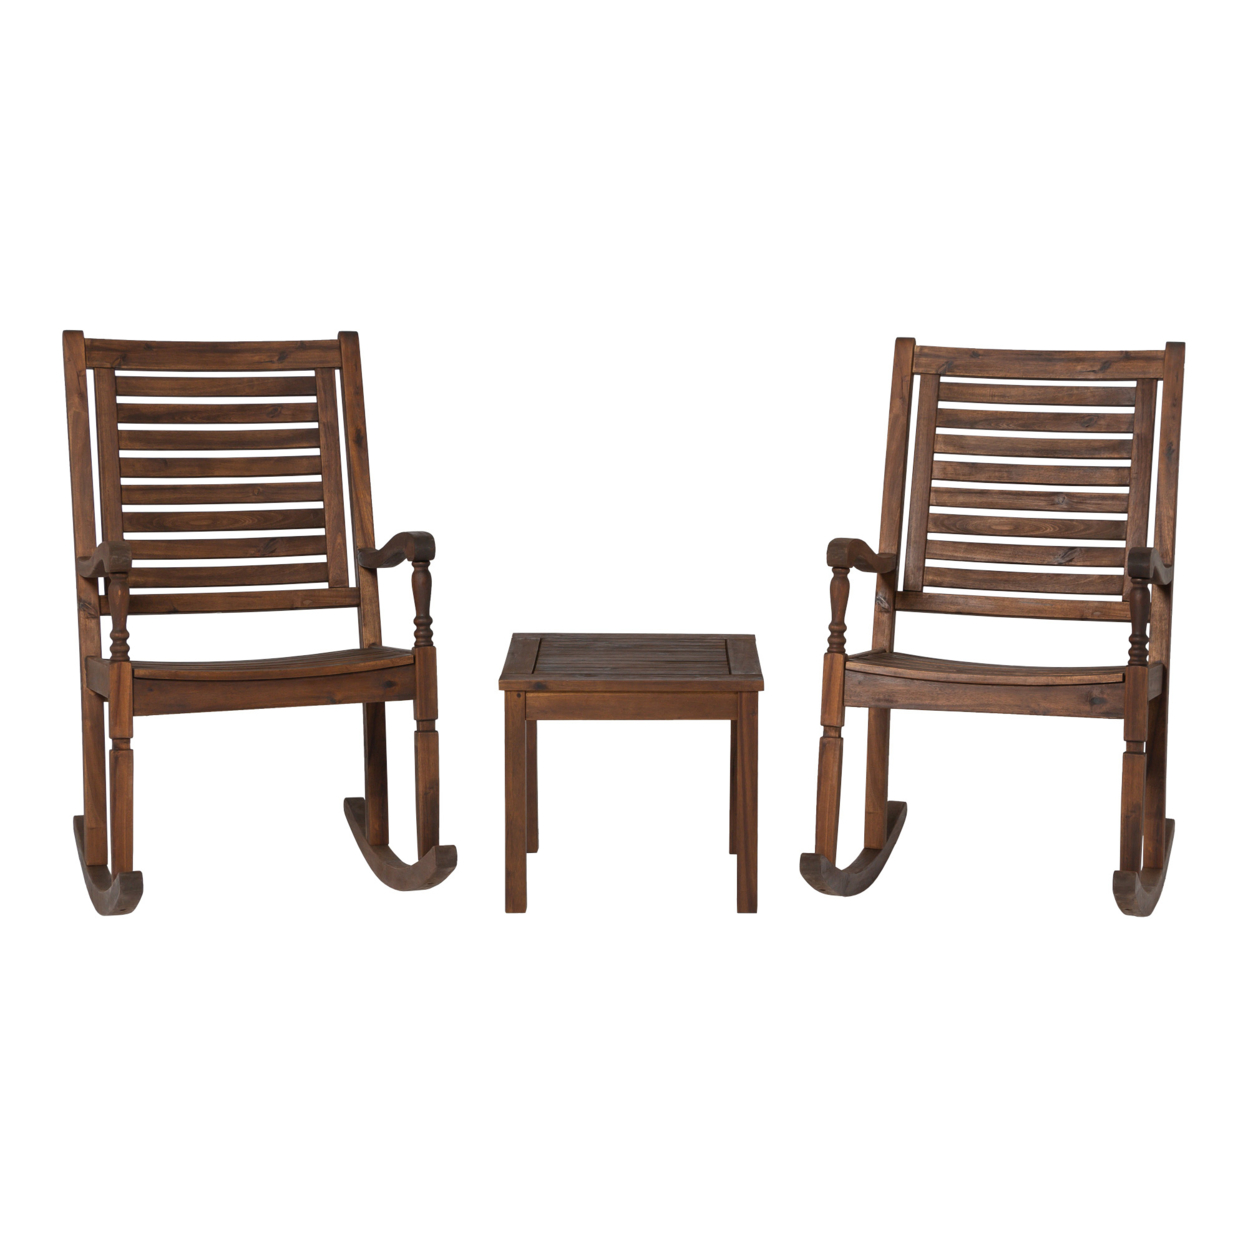 3-Piece Traditional Rocking Chair Outdoor Chat Set with Slatted Square Side Table - Dark Brown - image 1 of 2